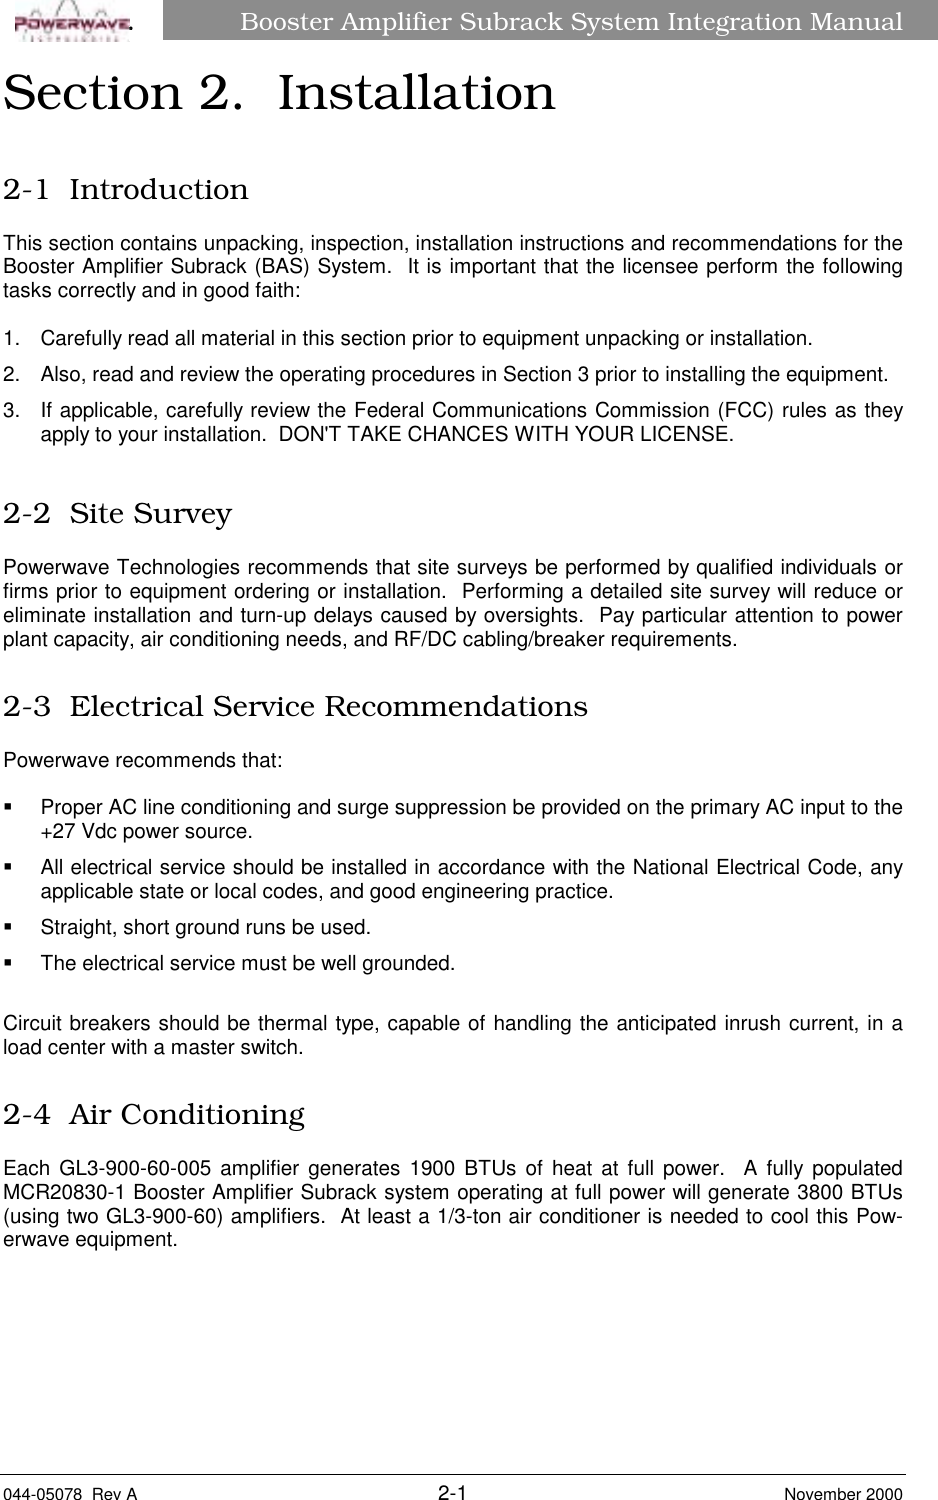 Booster Amplifier Subrack System Integration Manual044-05078  Rev A 2-1 November 2000âSection 2.  Installation2-1  IntroductionThis section contains unpacking, inspection, installation instructions and recommendations for theBooster Amplifier Subrack (BAS) System.  It is important that the licensee perform the followingtasks correctly and in good faith:1.  Carefully read all material in this section prior to equipment unpacking or installation.2.  Also, read and review the operating procedures in Section 3 prior to installing the equipment.3.  If applicable, carefully review the Federal Communications Commission (FCC) rules as theyapply to your installation.  DON&apos;T TAKE CHANCES WITH YOUR LICENSE.2-2  Site SurveyPowerwave Technologies recommends that site surveys be performed by qualified individuals orfirms prior to equipment ordering or installation.  Performing a detailed site survey will reduce oreliminate installation and turn-up delays caused by oversights.  Pay particular attention to powerplant capacity, air conditioning needs, and RF/DC cabling/breaker requirements.2-3  Electrical Service RecommendationsPowerwave recommends that:§  Proper AC line conditioning and surge suppression be provided on the primary AC input to the+27 Vdc power source.§  All electrical service should be installed in accordance with the National Electrical Code, anyapplicable state or local codes, and good engineering practice.§  Straight, short ground runs be used.§  The electrical service must be well grounded.Circuit breakers should be thermal type, capable of handling the anticipated inrush current, in aload center with a master switch.2-4  Air ConditioningEach GL3-900-60-005 amplifier generates 1900 BTUs of heat at full power.  A fully populatedMCR20830-1 Booster Amplifier Subrack system operating at full power will generate 3800 BTUs(using two GL3-900-60) amplifiers.  At least a 1/3-ton air conditioner is needed to cool this Pow-erwave equipment.